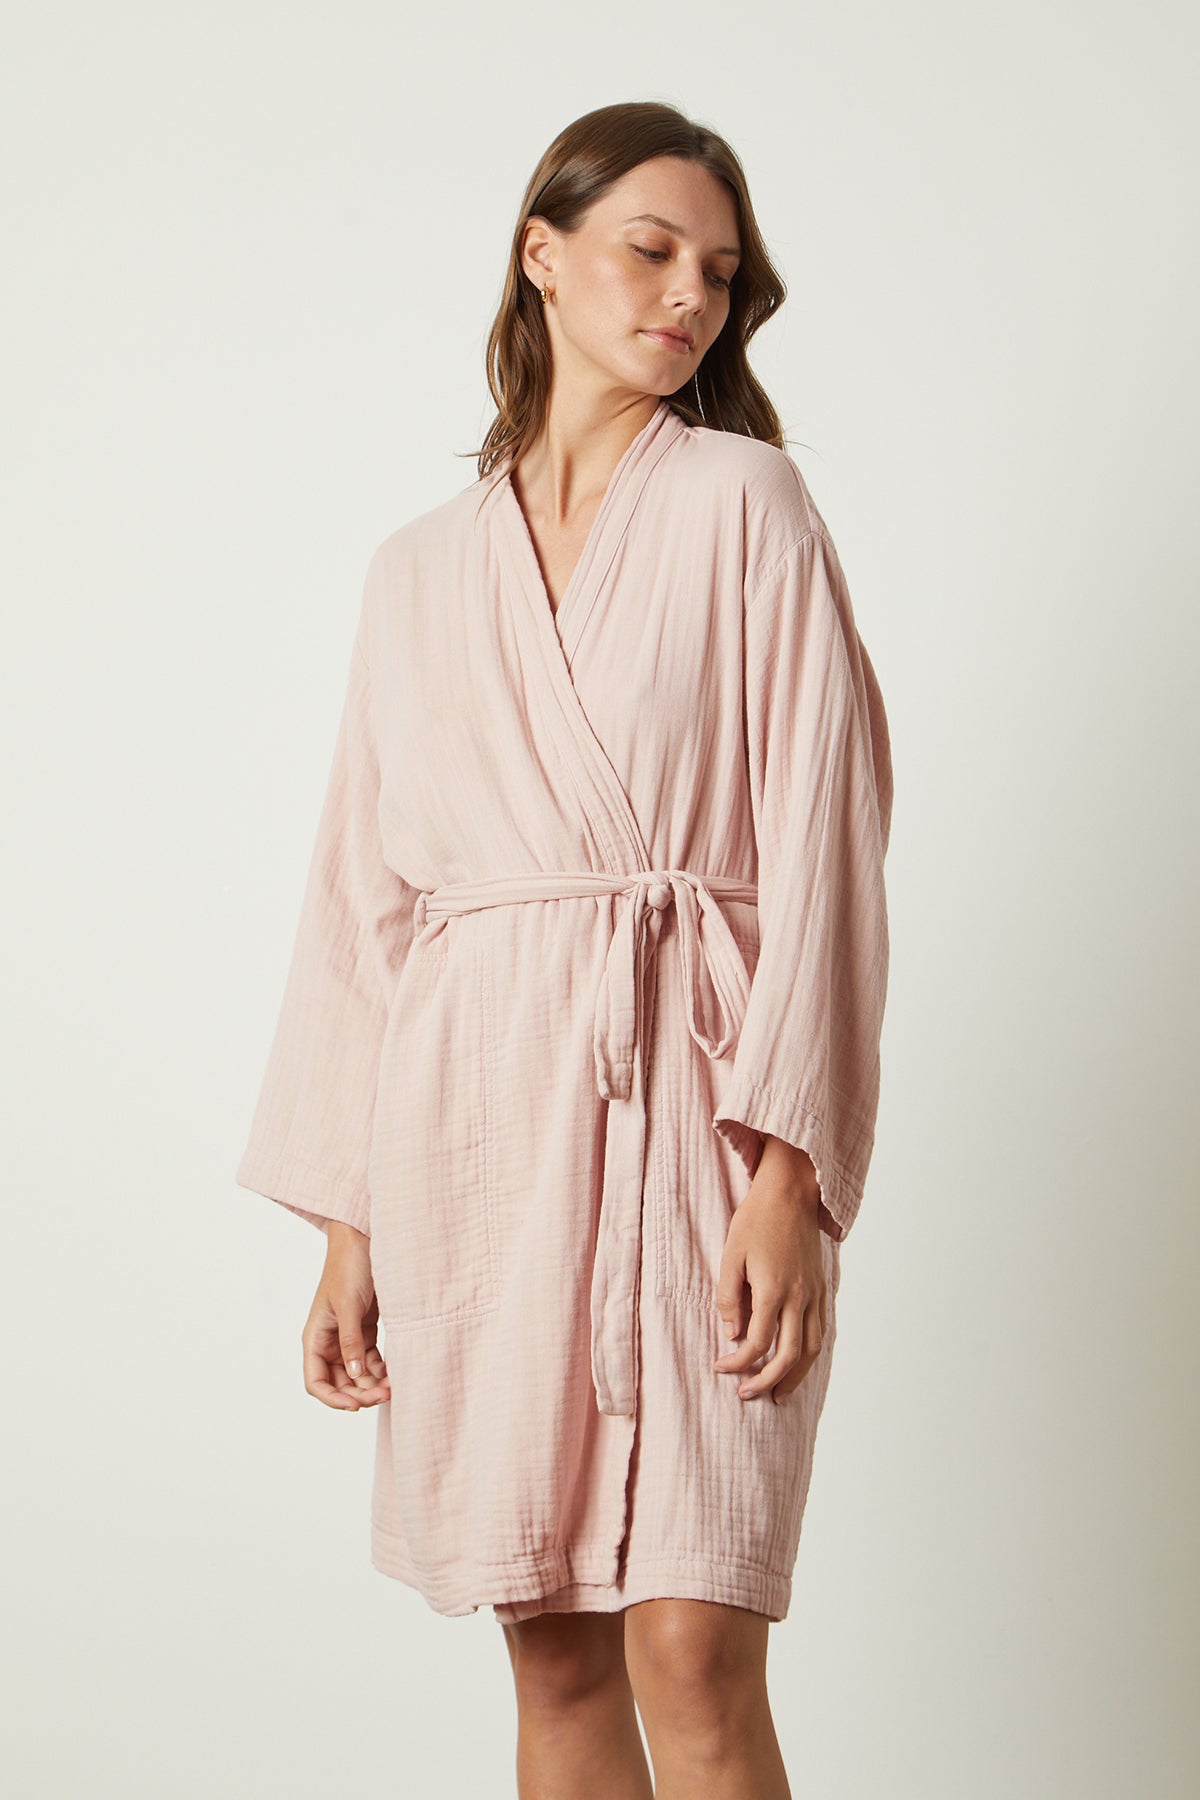 A woman wearing a mini thigh-length MINI COTTON GAUZE ROBE from Jenny Graham Home with a soft texture.-25519664791745